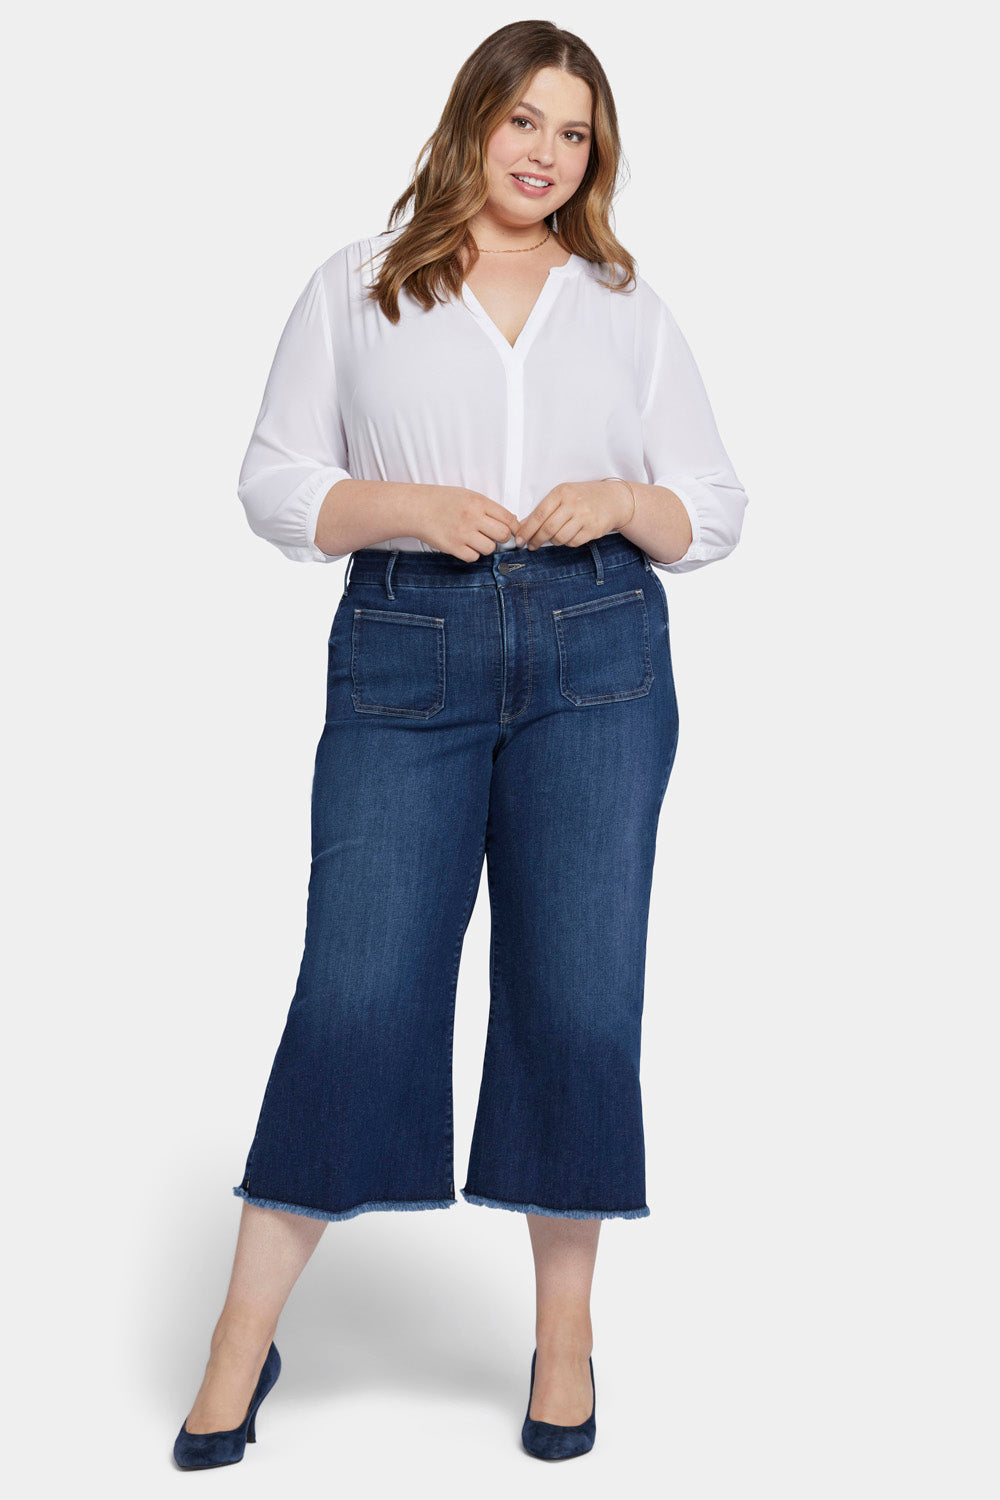 NYDJ Patchie Wide Leg Capri Jeans In Plus Size With Frayed Hems - Fanciful